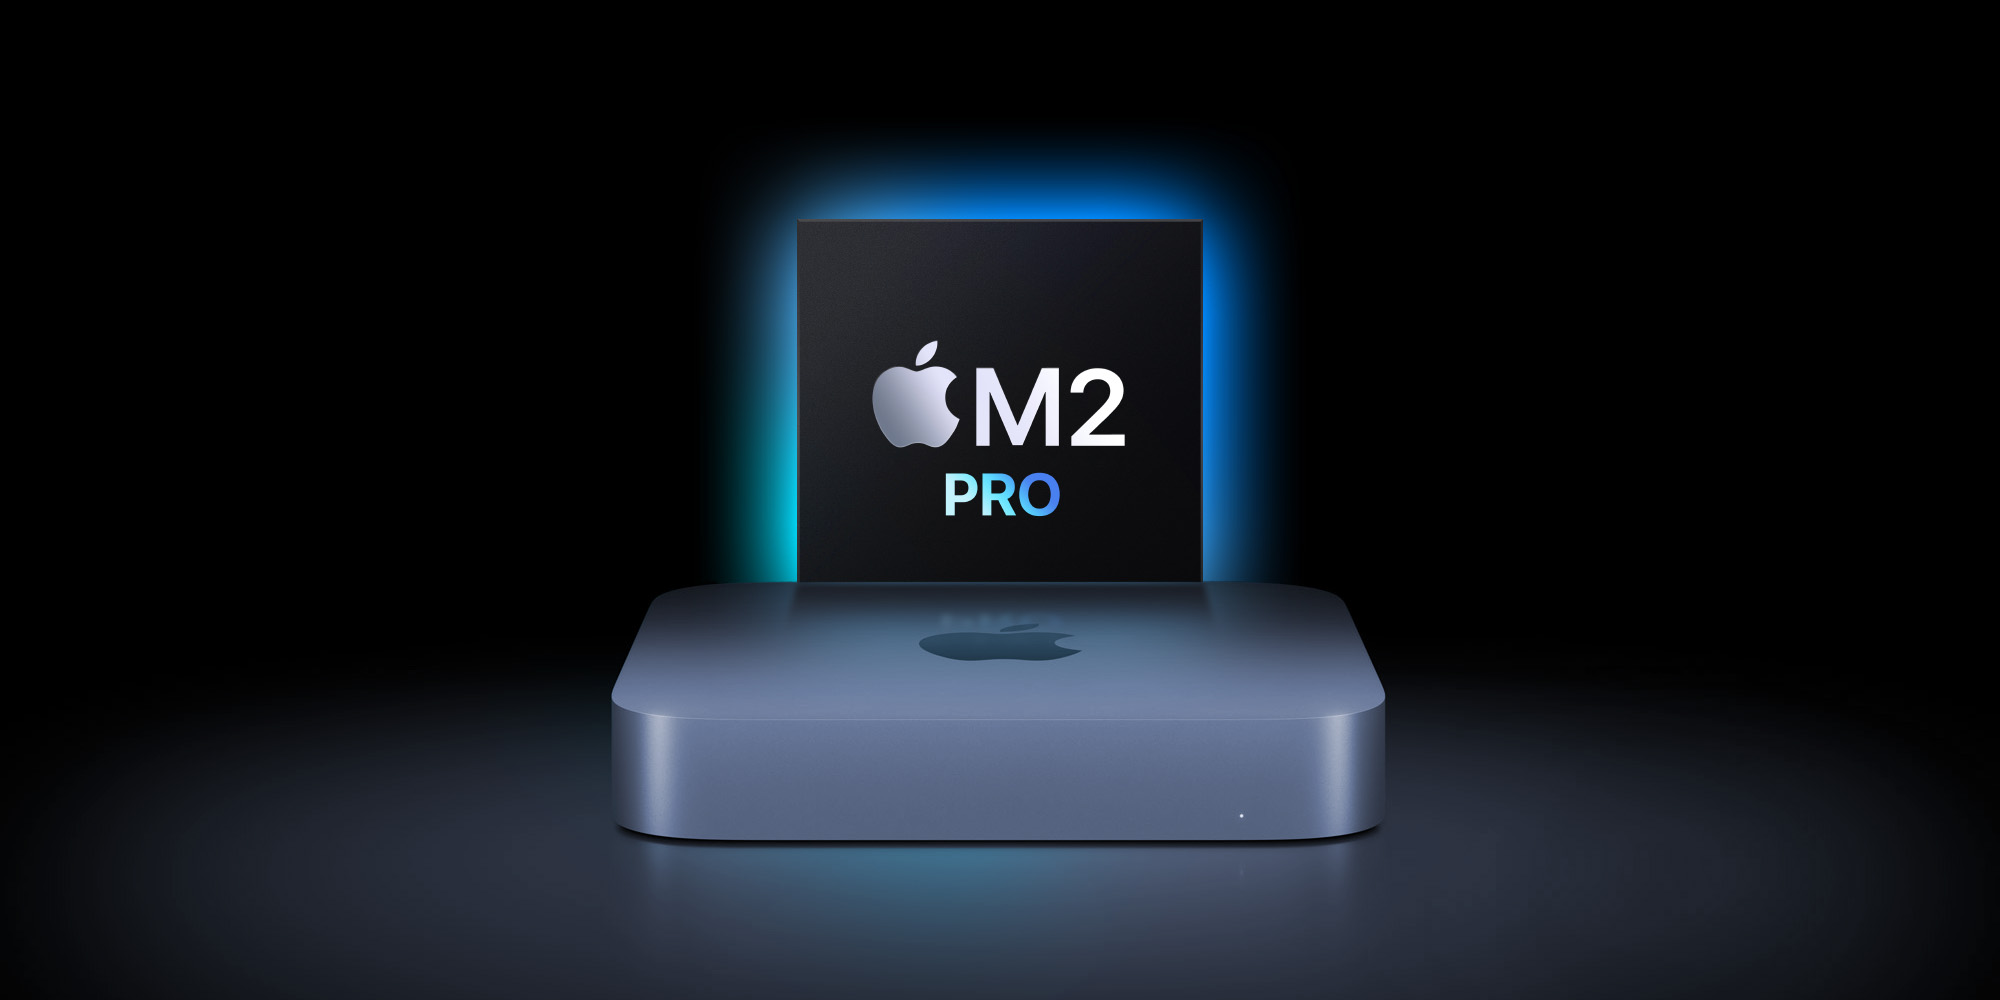 Apple explains how M2 Pro Macs are ready for 8K displays